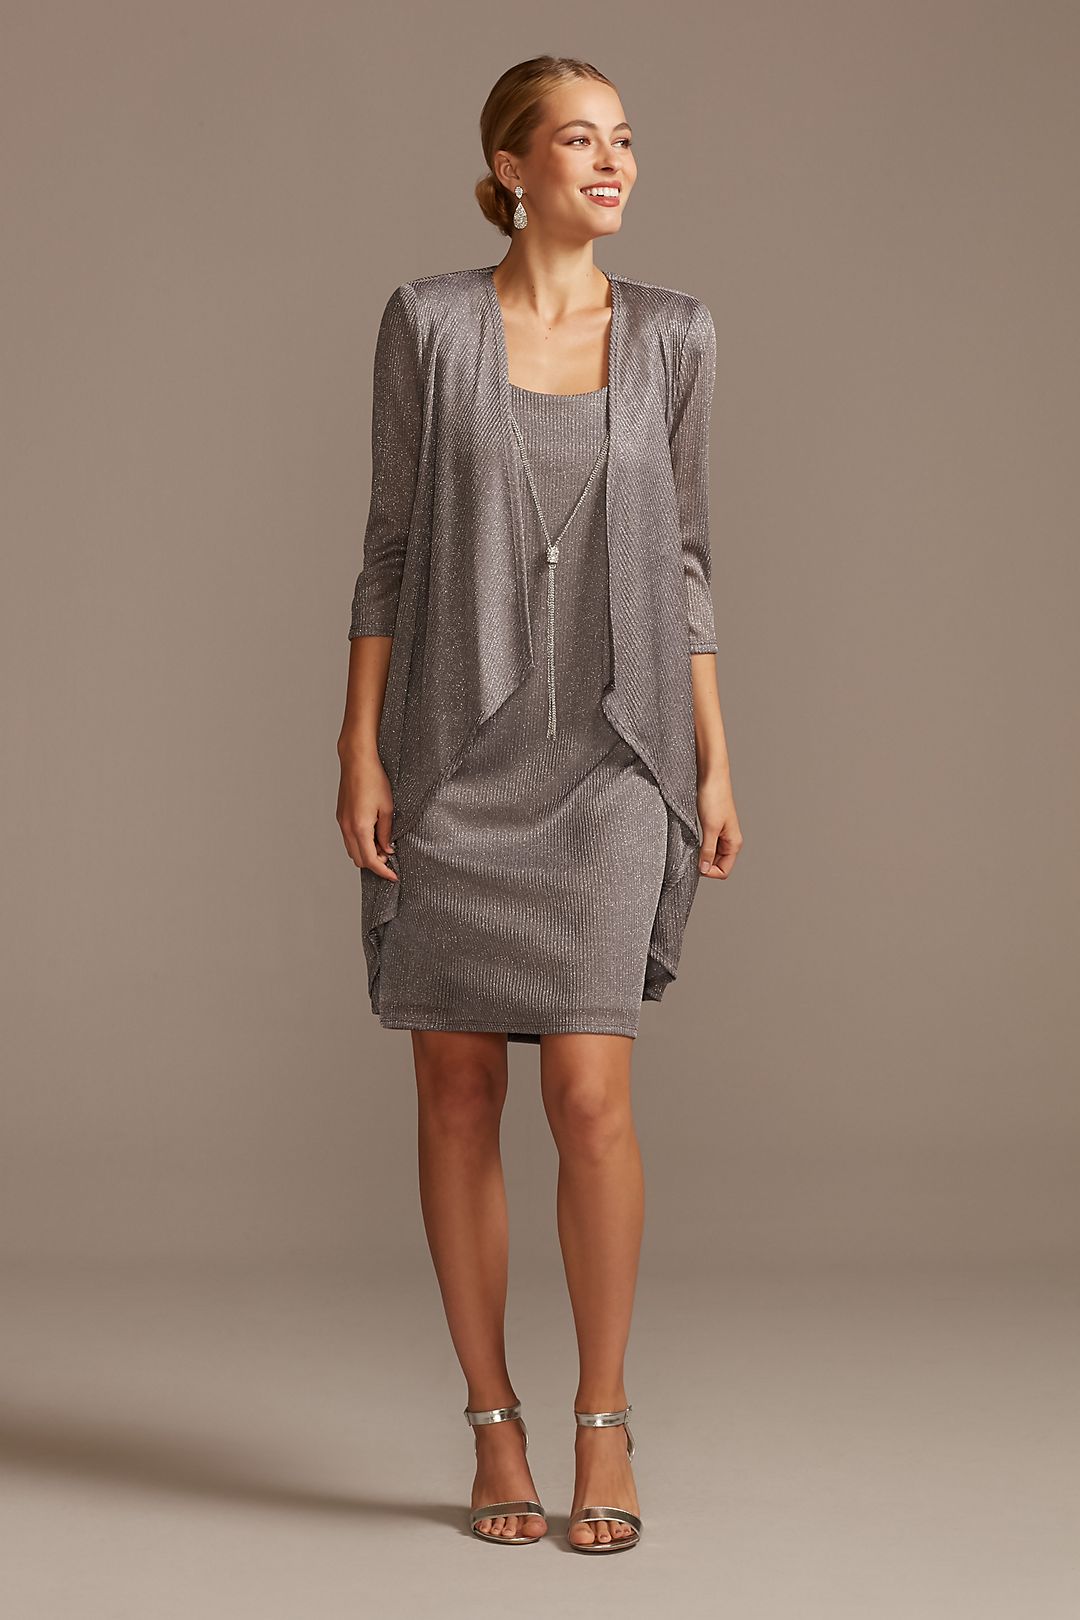 Glitter Knit Jacket Dress and Attached Necklace Image 4